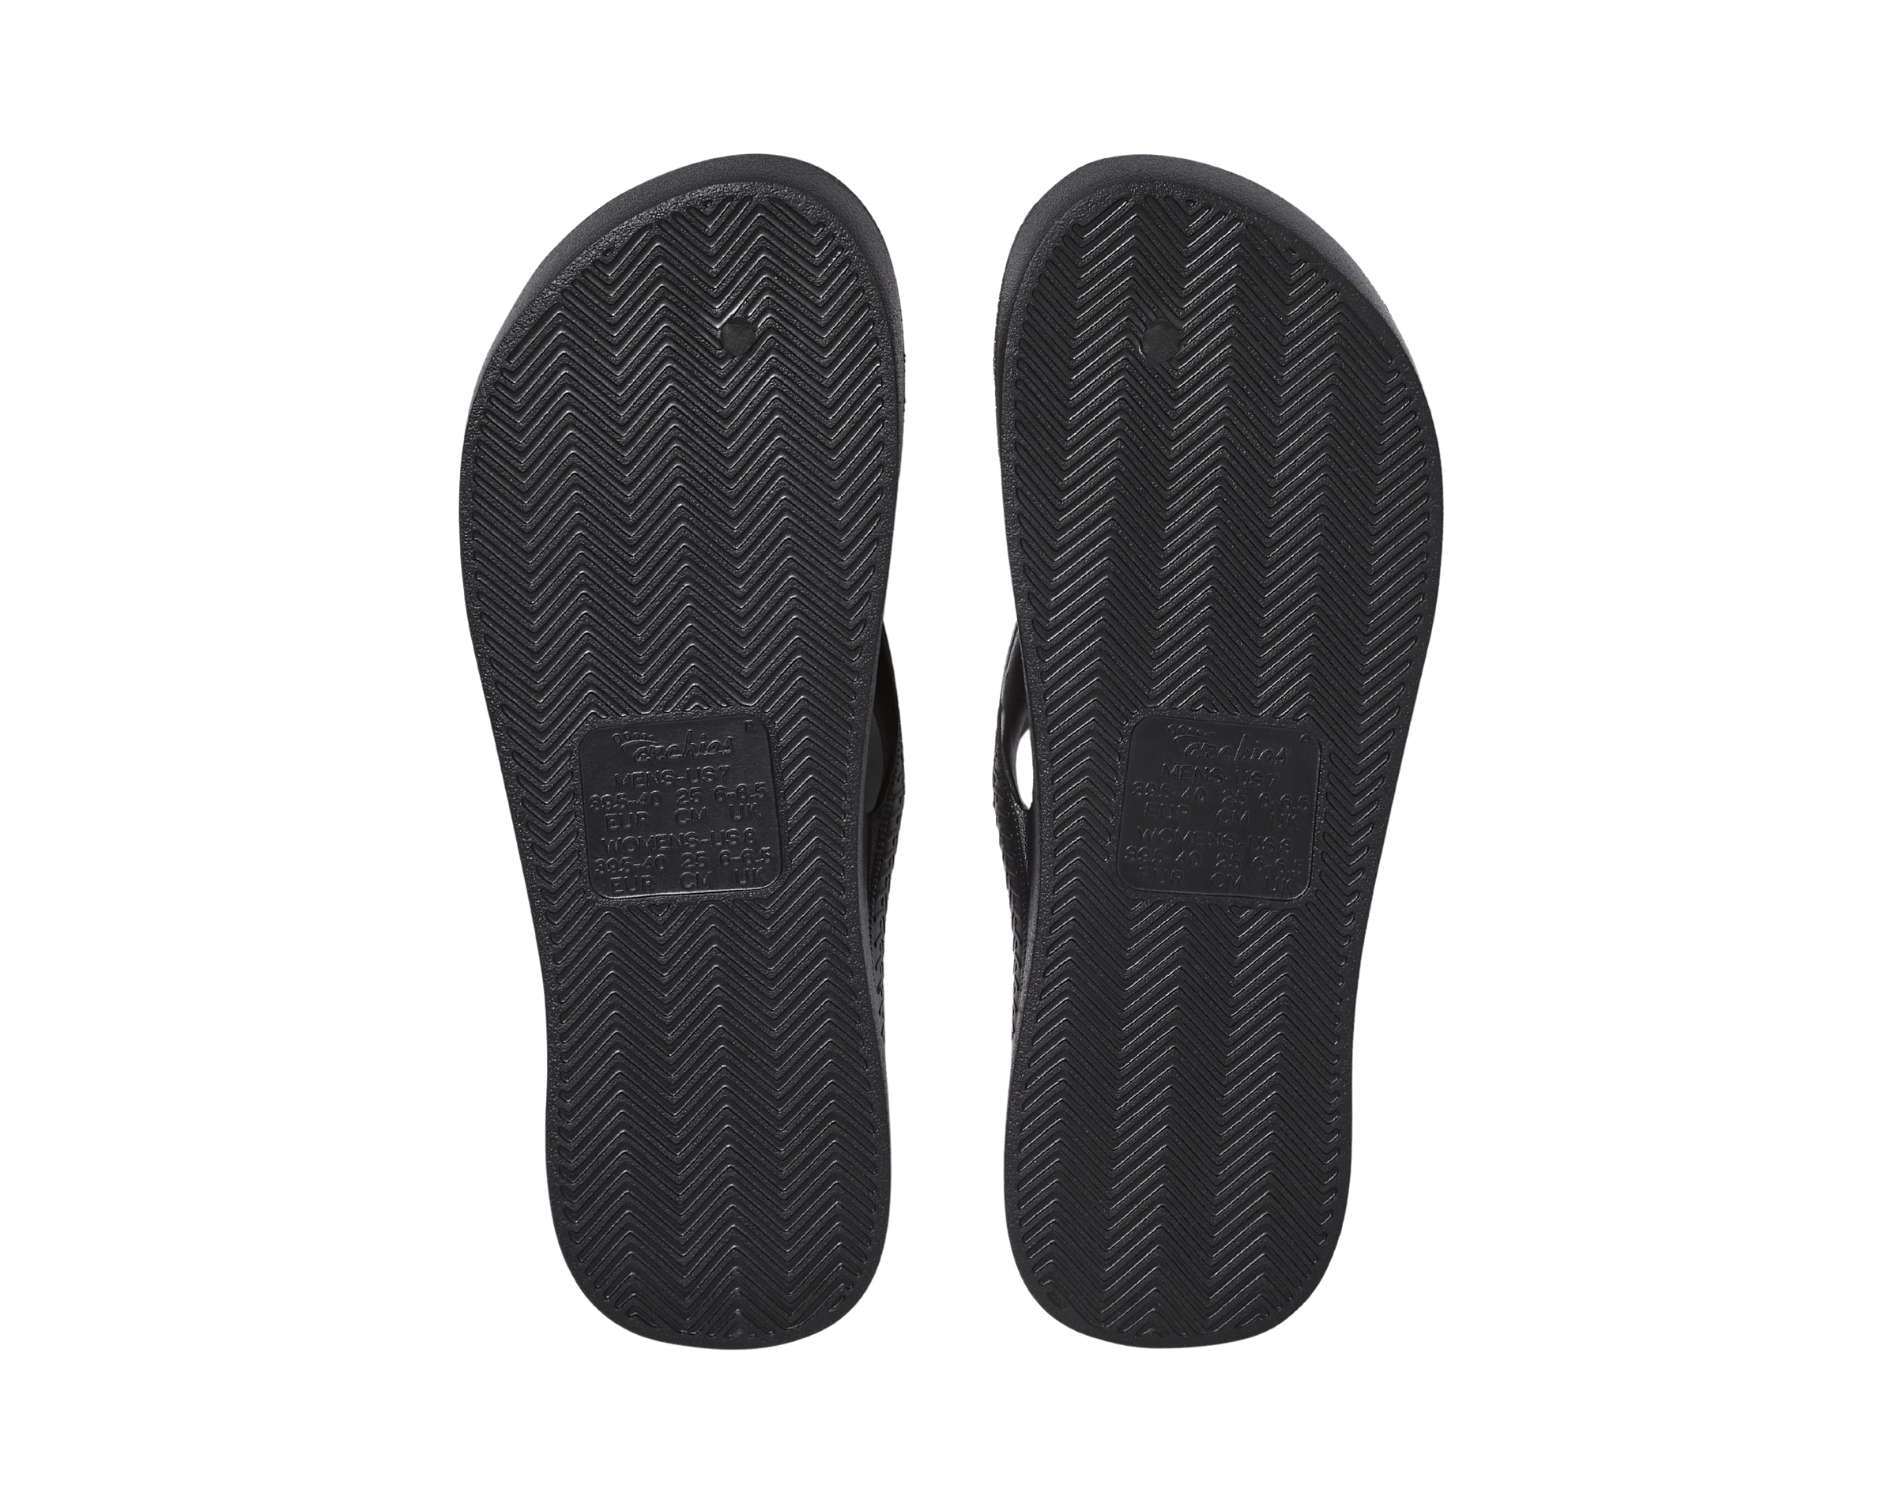 Archies arch support thongs in black colour